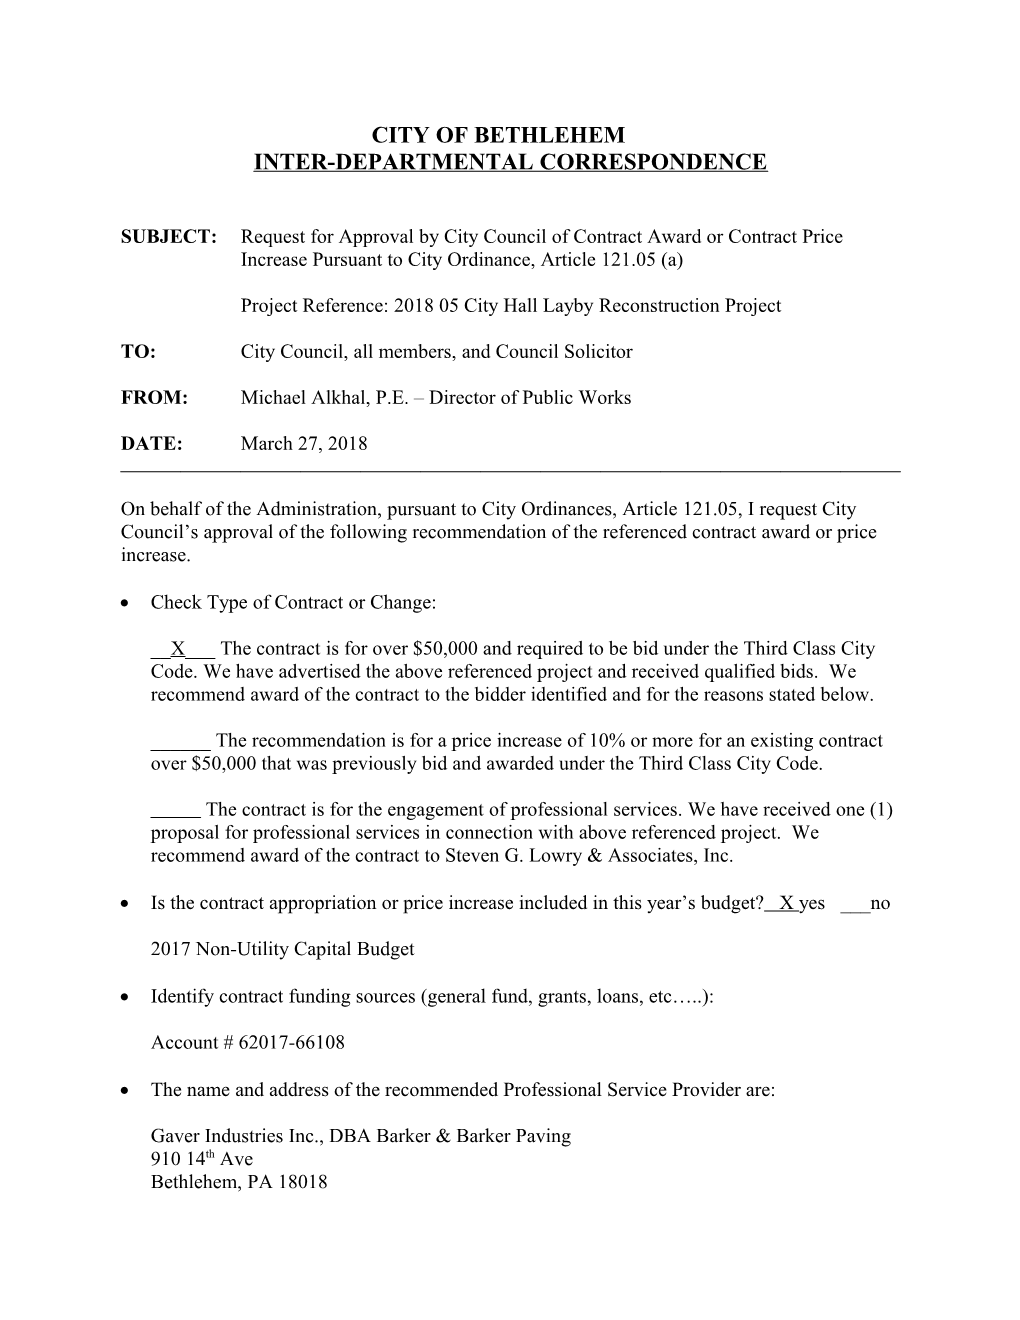 Blank City Council Contract Approval Form